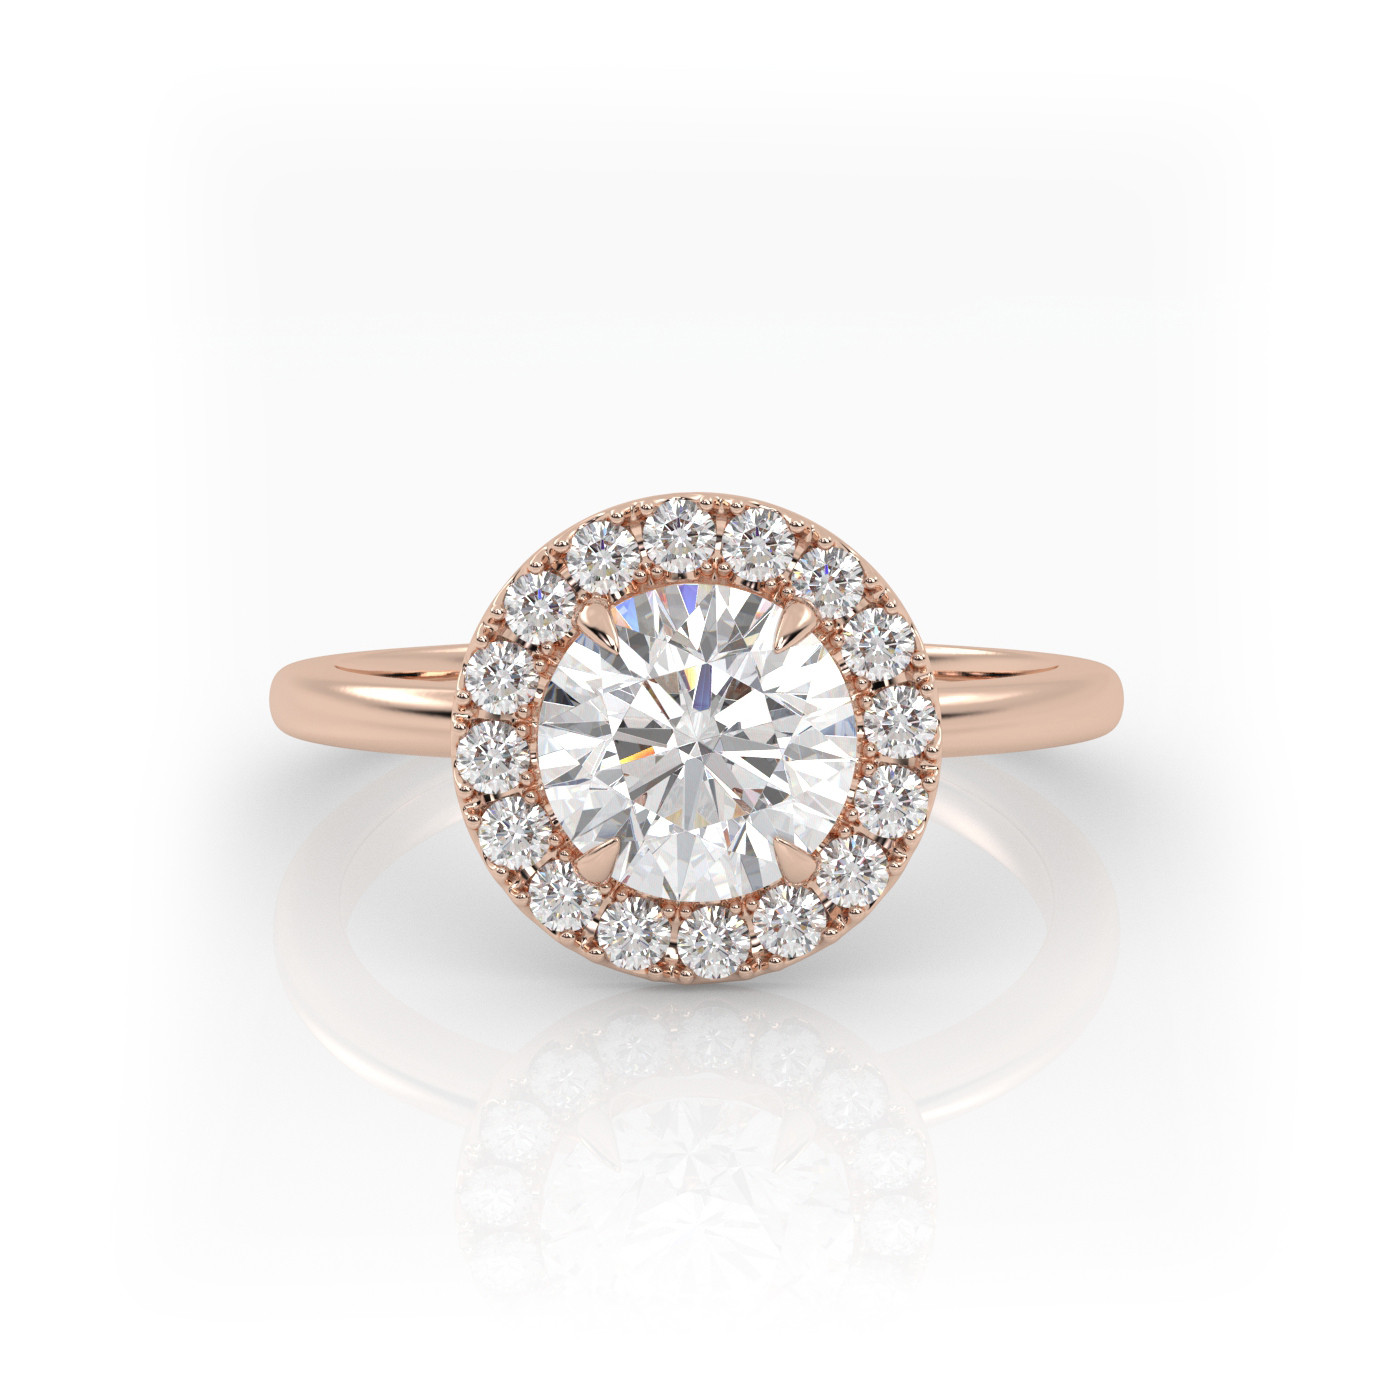 18K ROSE GOLD Round Diamond Cut Engagement Ring with Halo Style